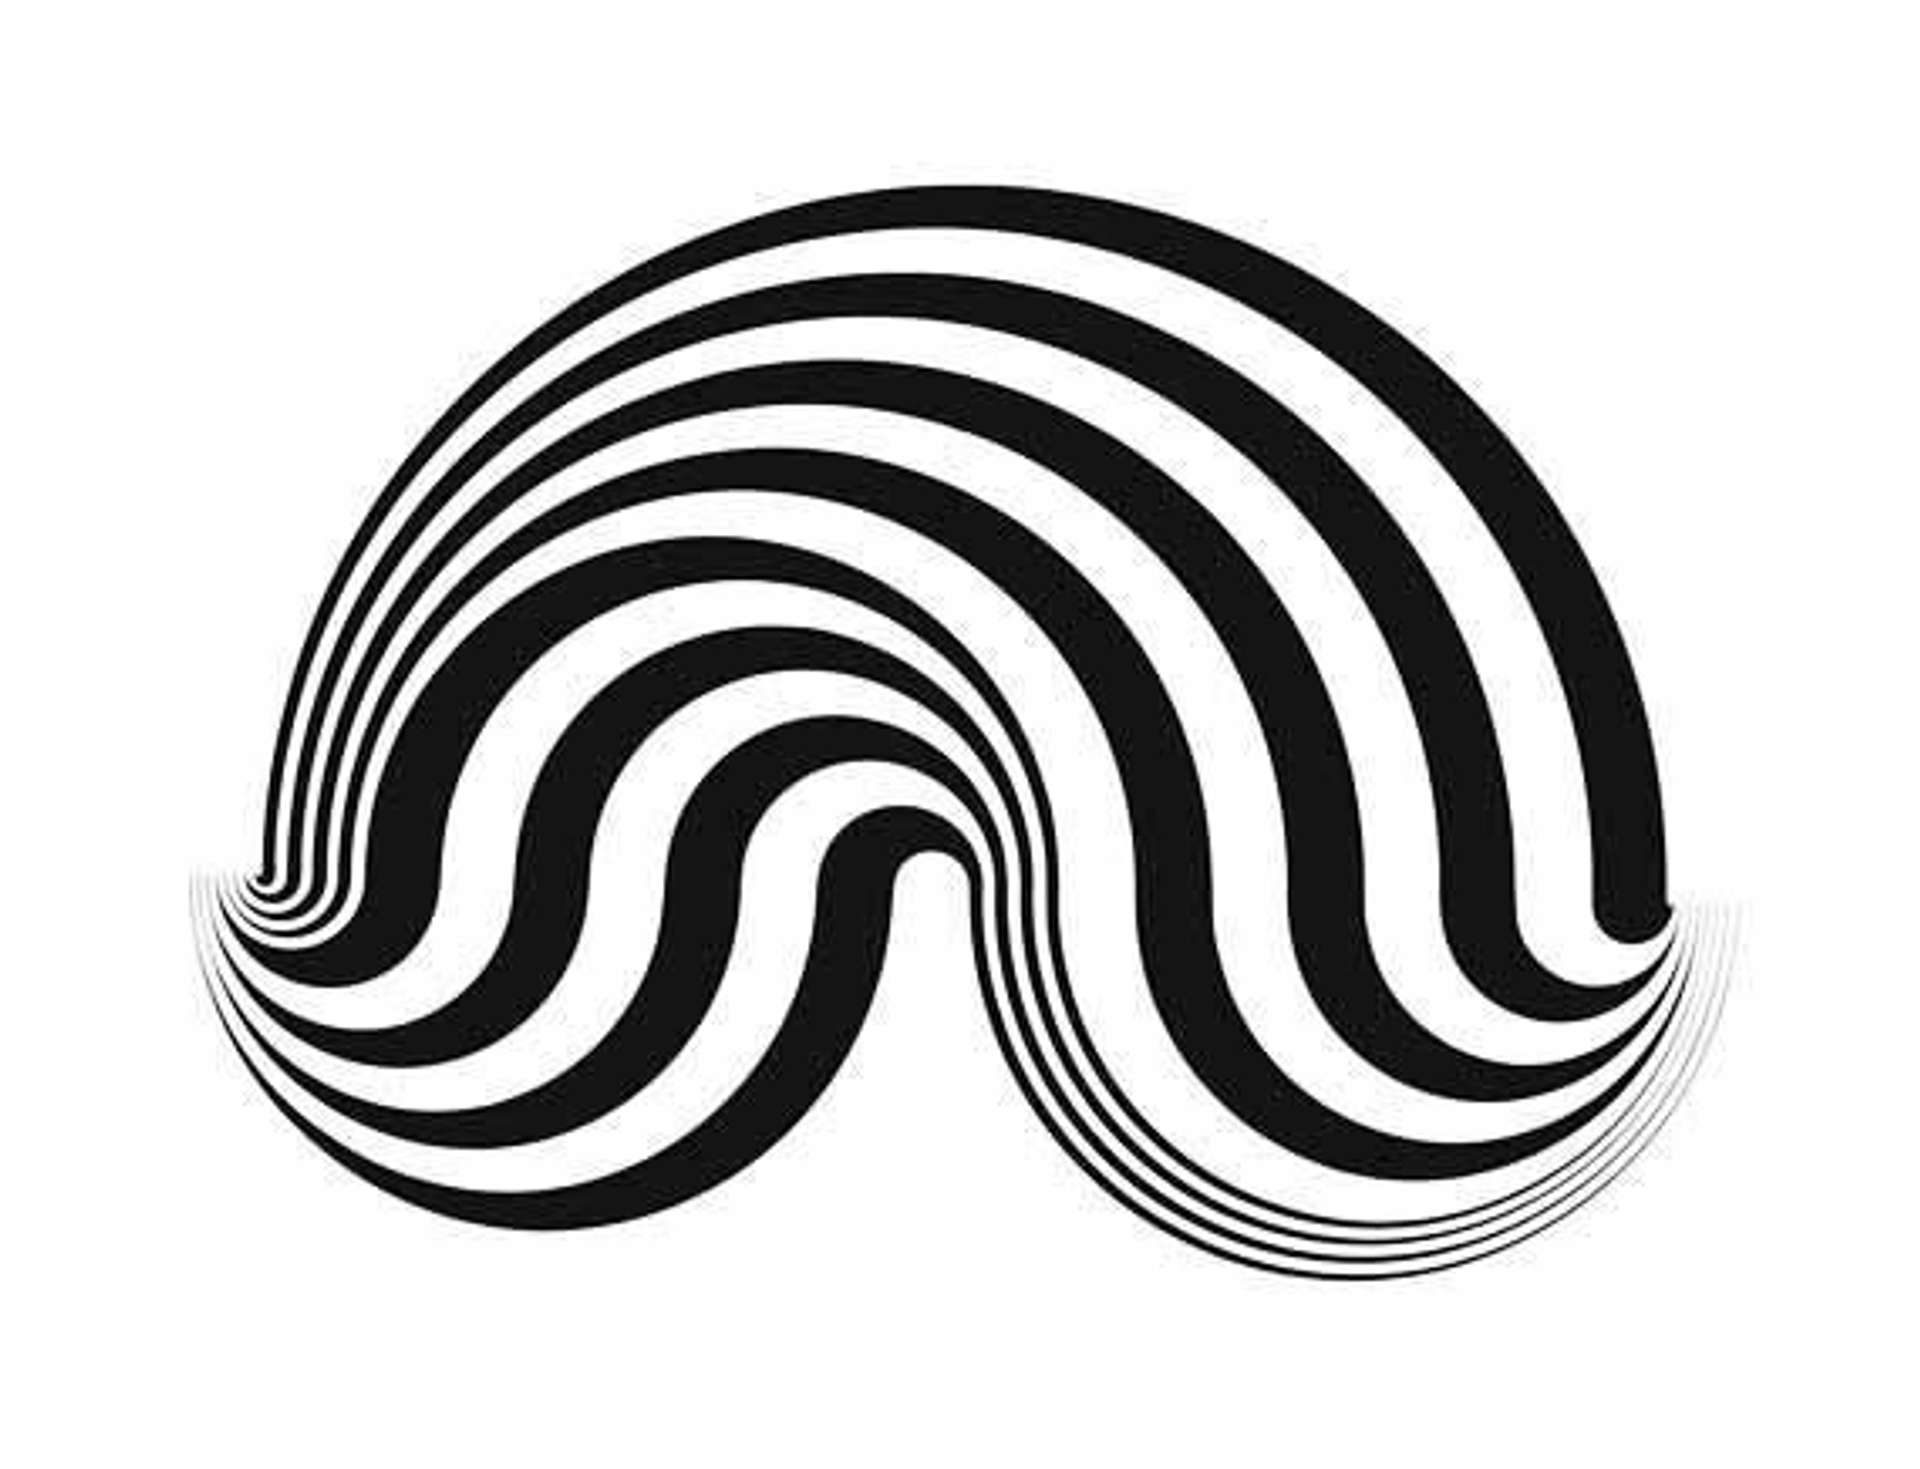 Bridget Riley’s Fragment 5. An Op Art screenprint of black and white lines curved in the style of a half circle